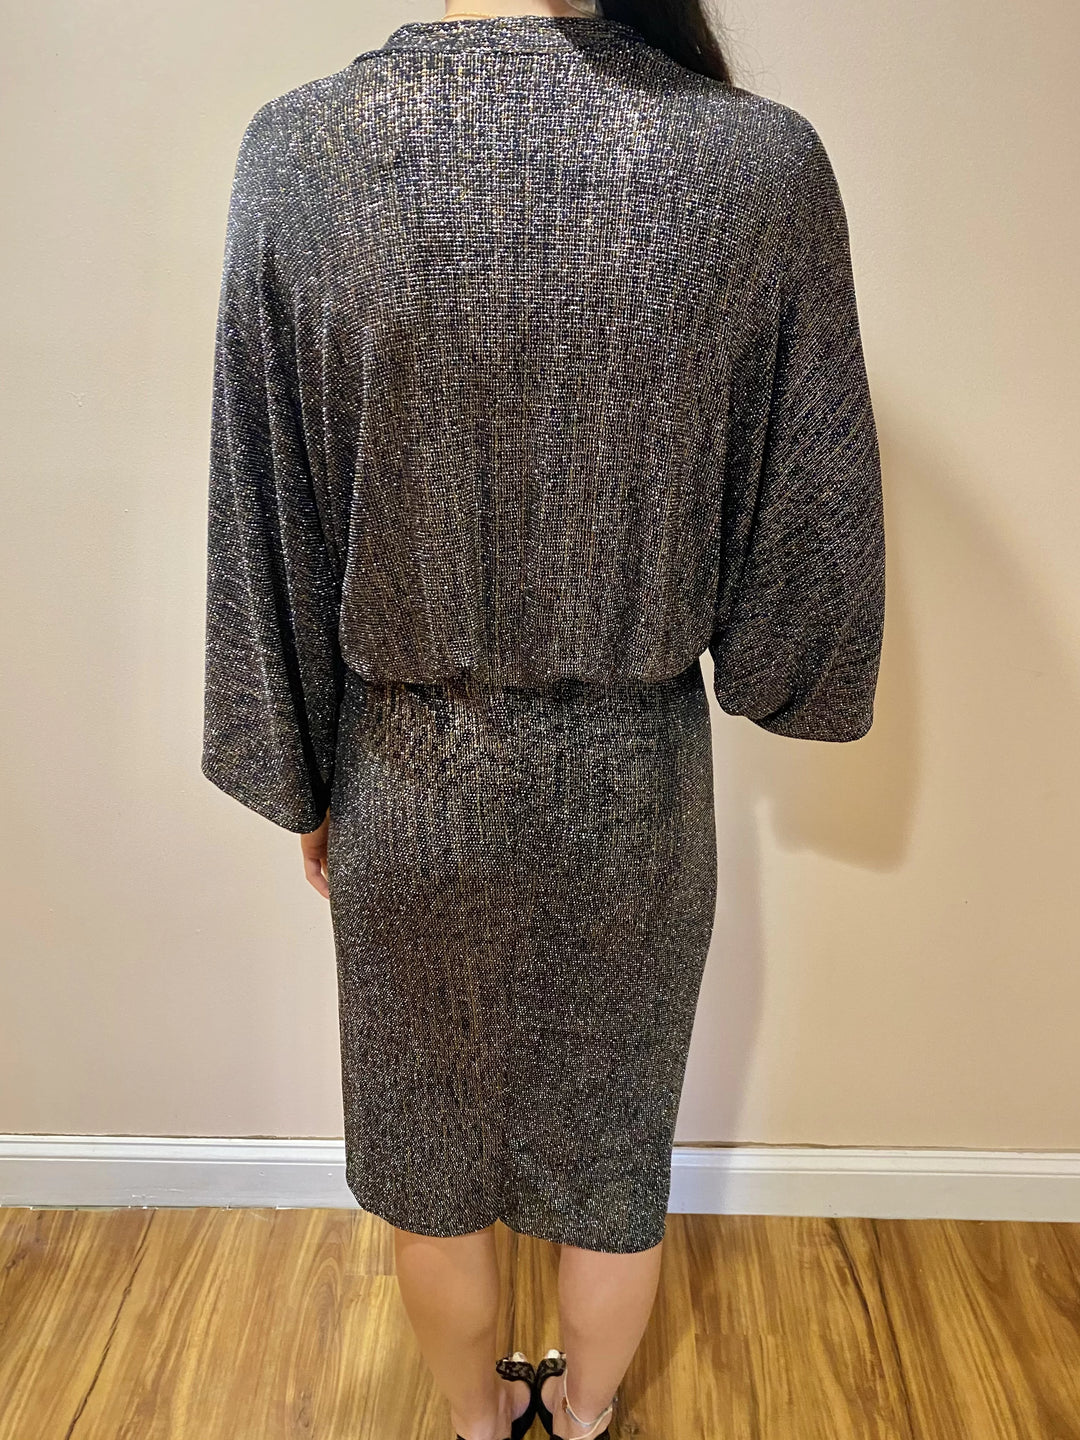 Retro Dress ins Black/Silver Shimmer from Apricot Lane Size L